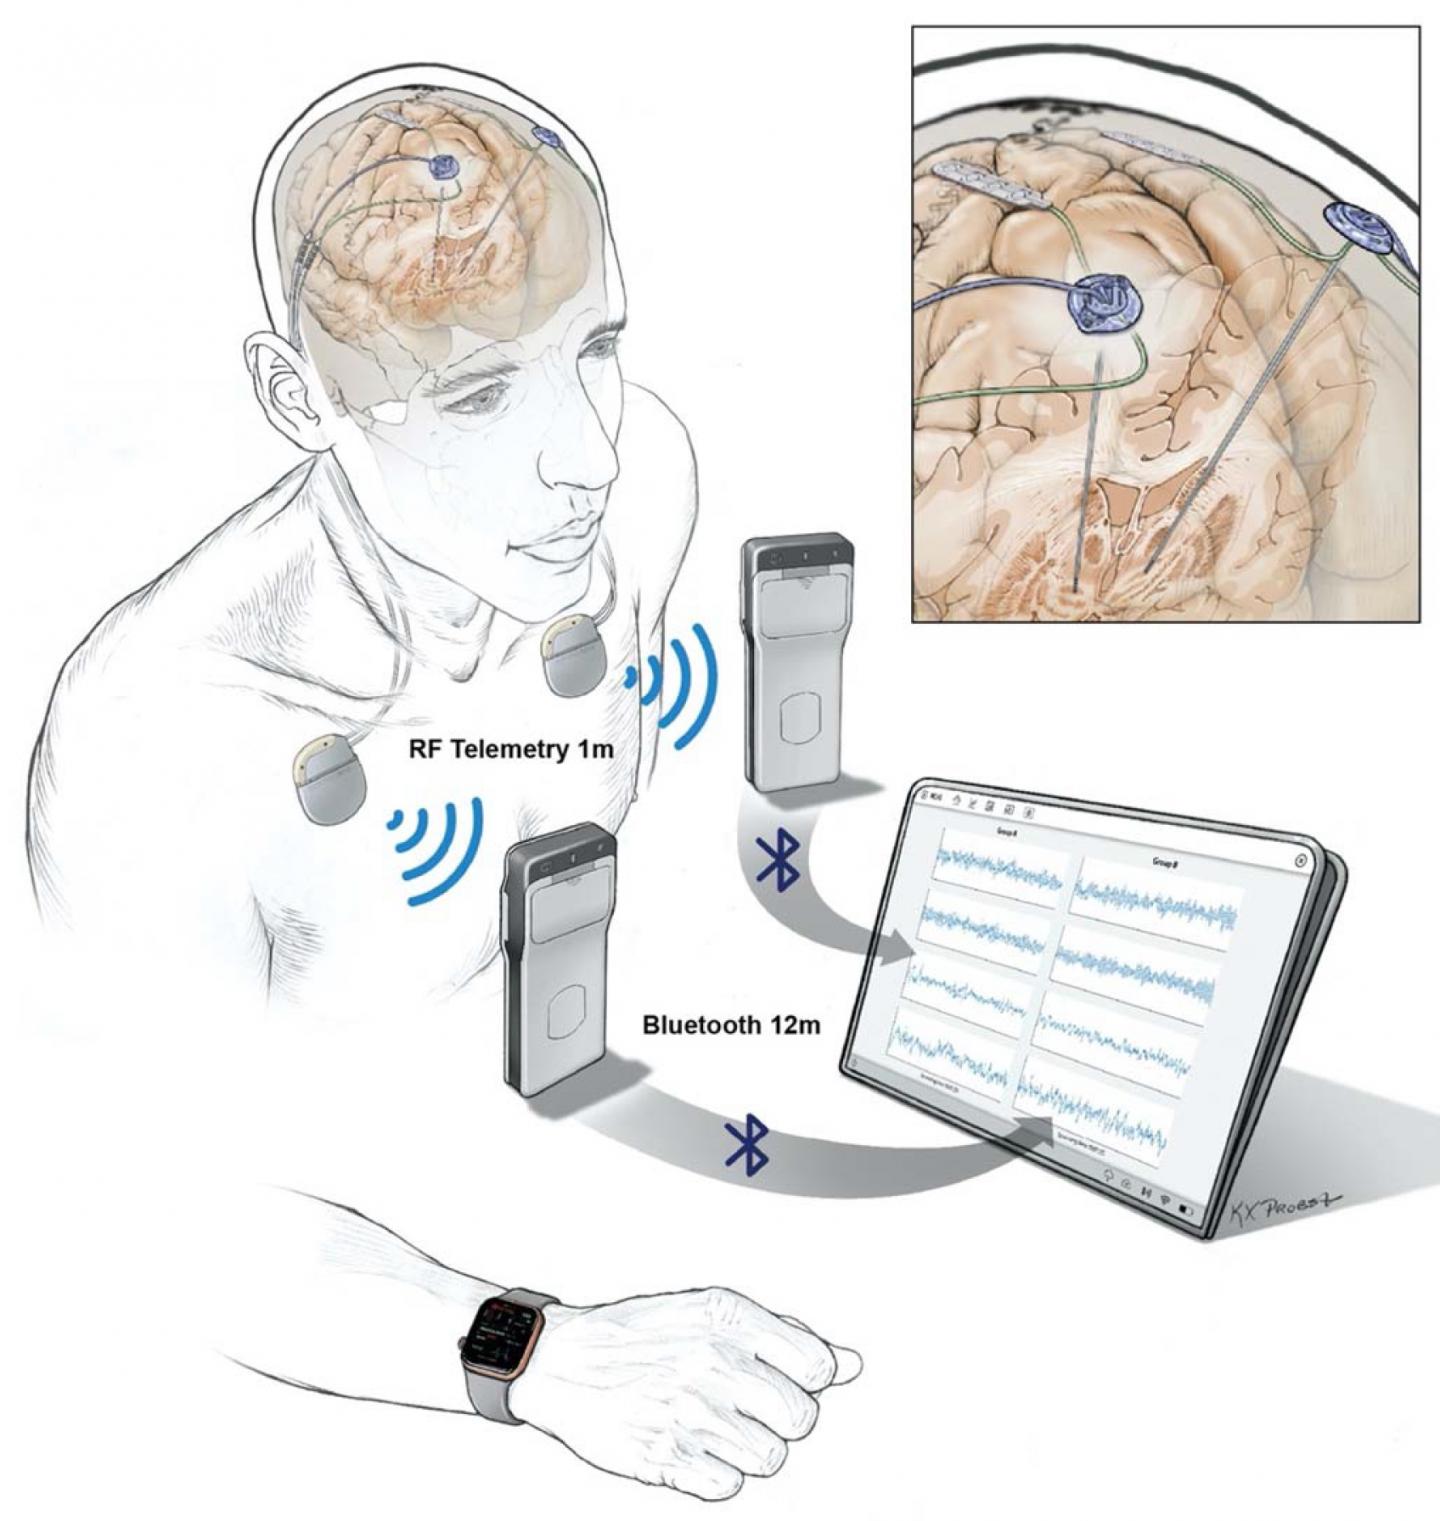 Researchers wirelessly record human brain activity during normal life activities